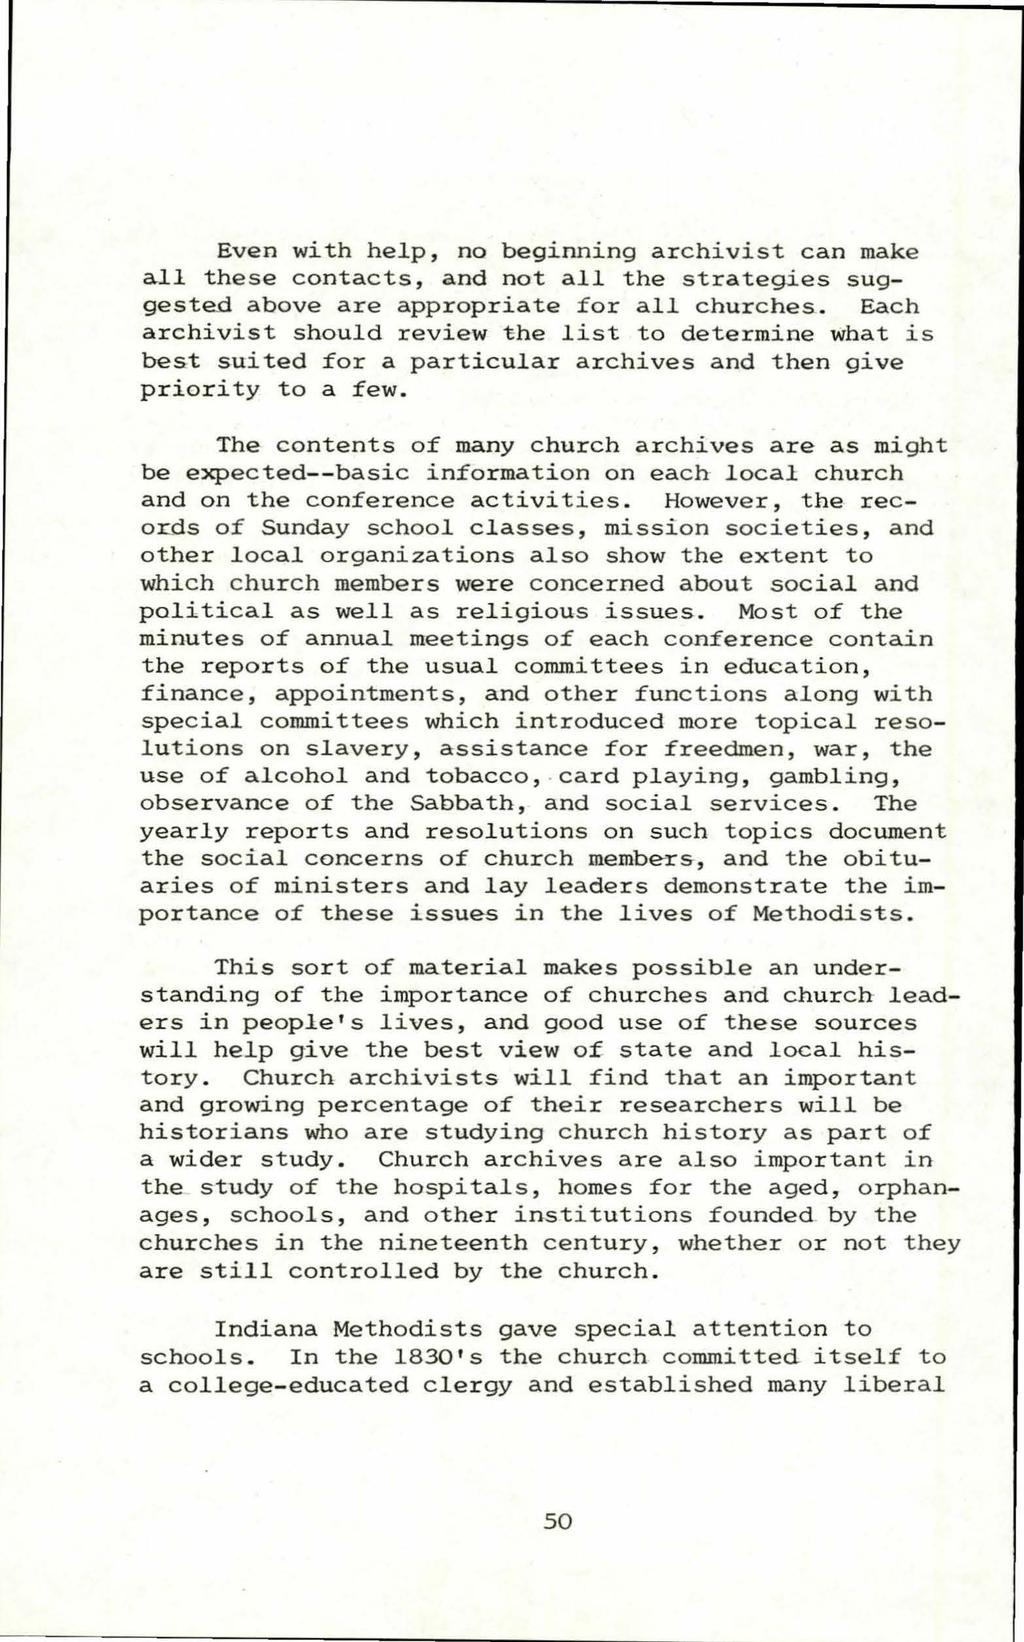 Georgia Archive, Vol. 8 [1980], No. 2, Art. 5 Even with help, no beginning archivist can make all these contacts, and not all the strategies suggeste.d above are appropriate for all churche.